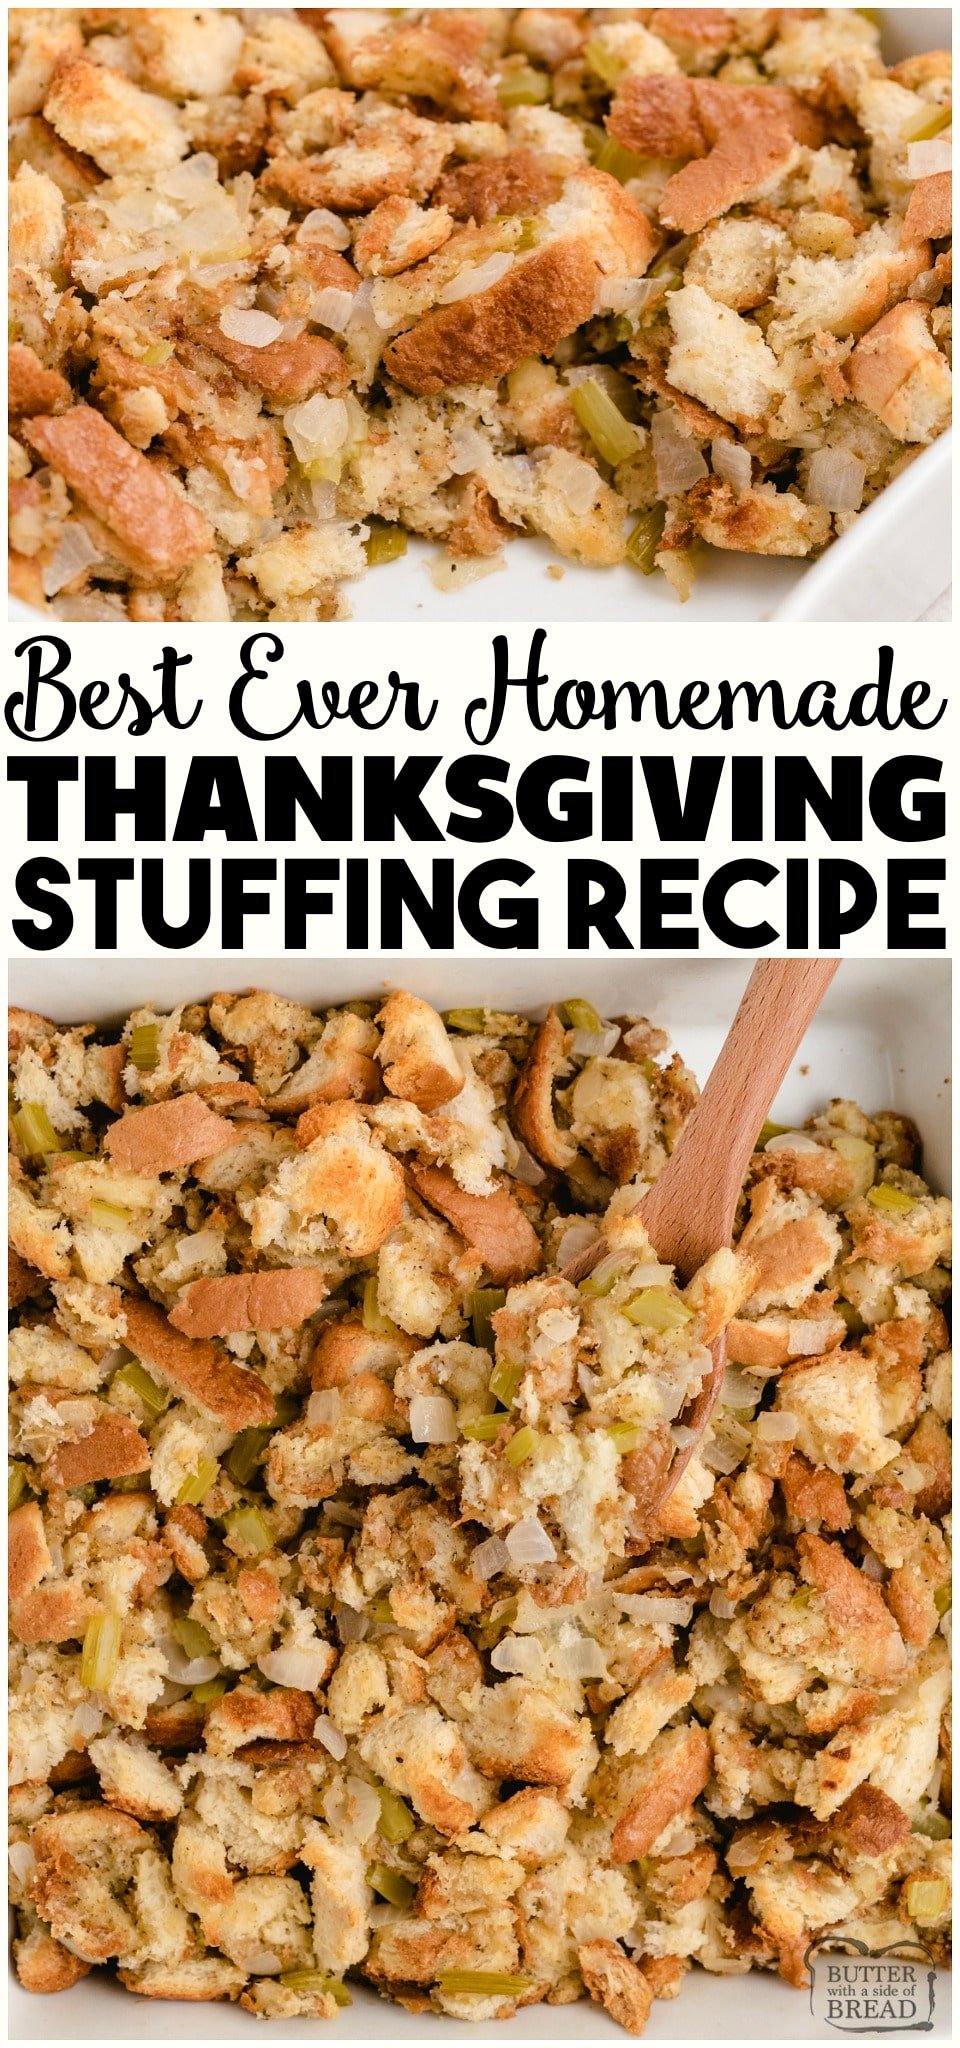 Our Homemade Thanksgiving stuffing recipe made with just 6 simple ingredients! Easy Thanksgiving Dressing recipe combines fresh bread, vegetables, & chicken broth for a simple & flavorful turkey side dish. 